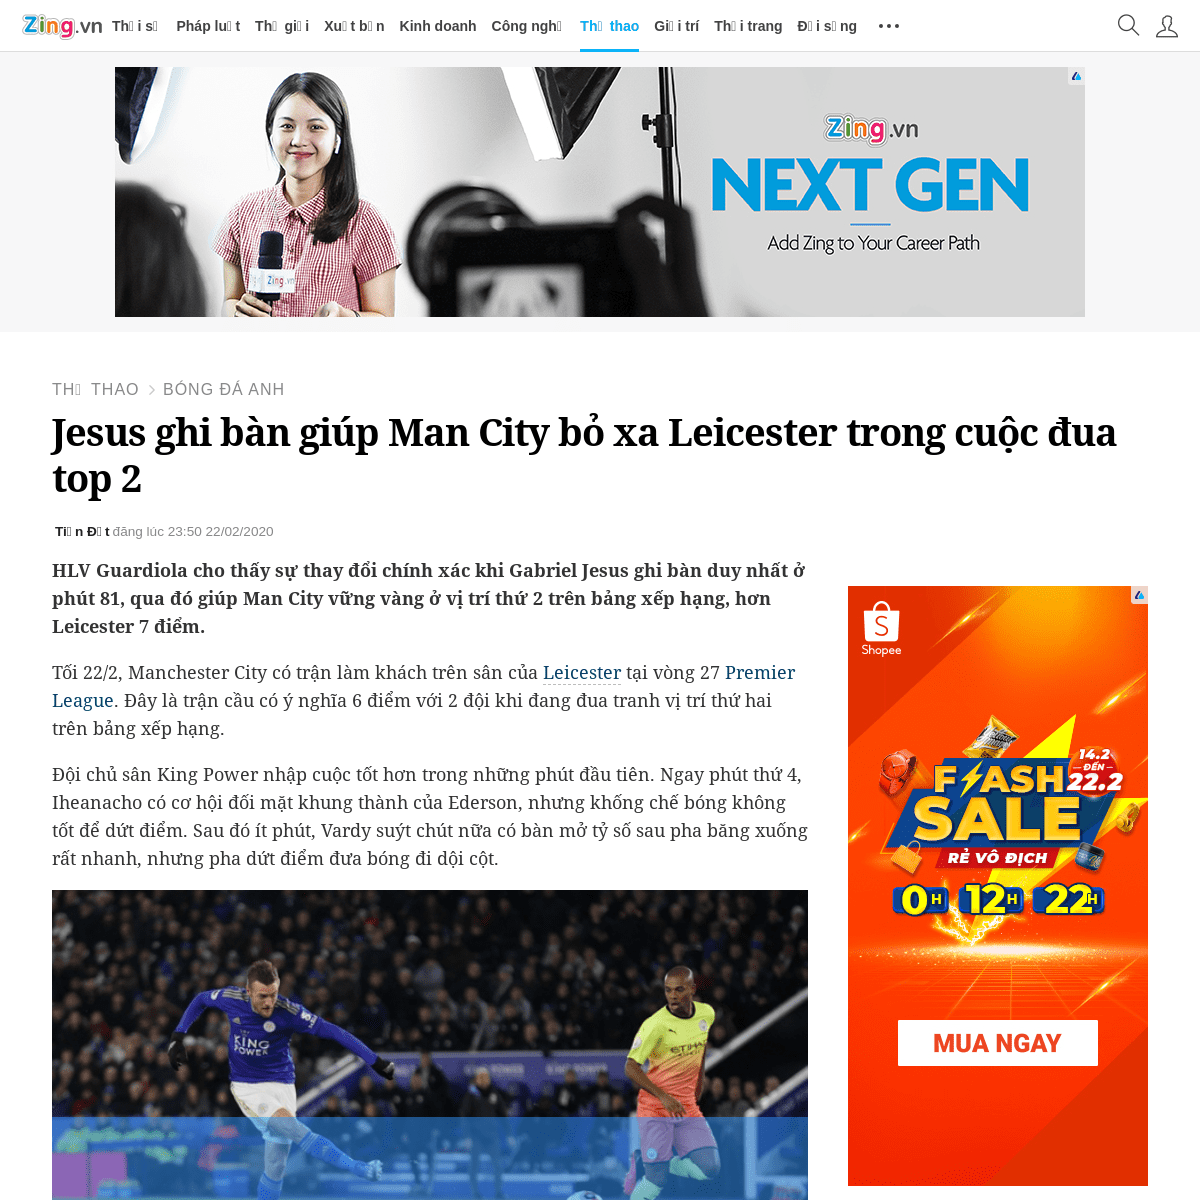 A complete backup of news.zing.vn/leicester-vs-man-city-pep-guardiola-tung-doi-hinh-manh-nhat-post1050489.html